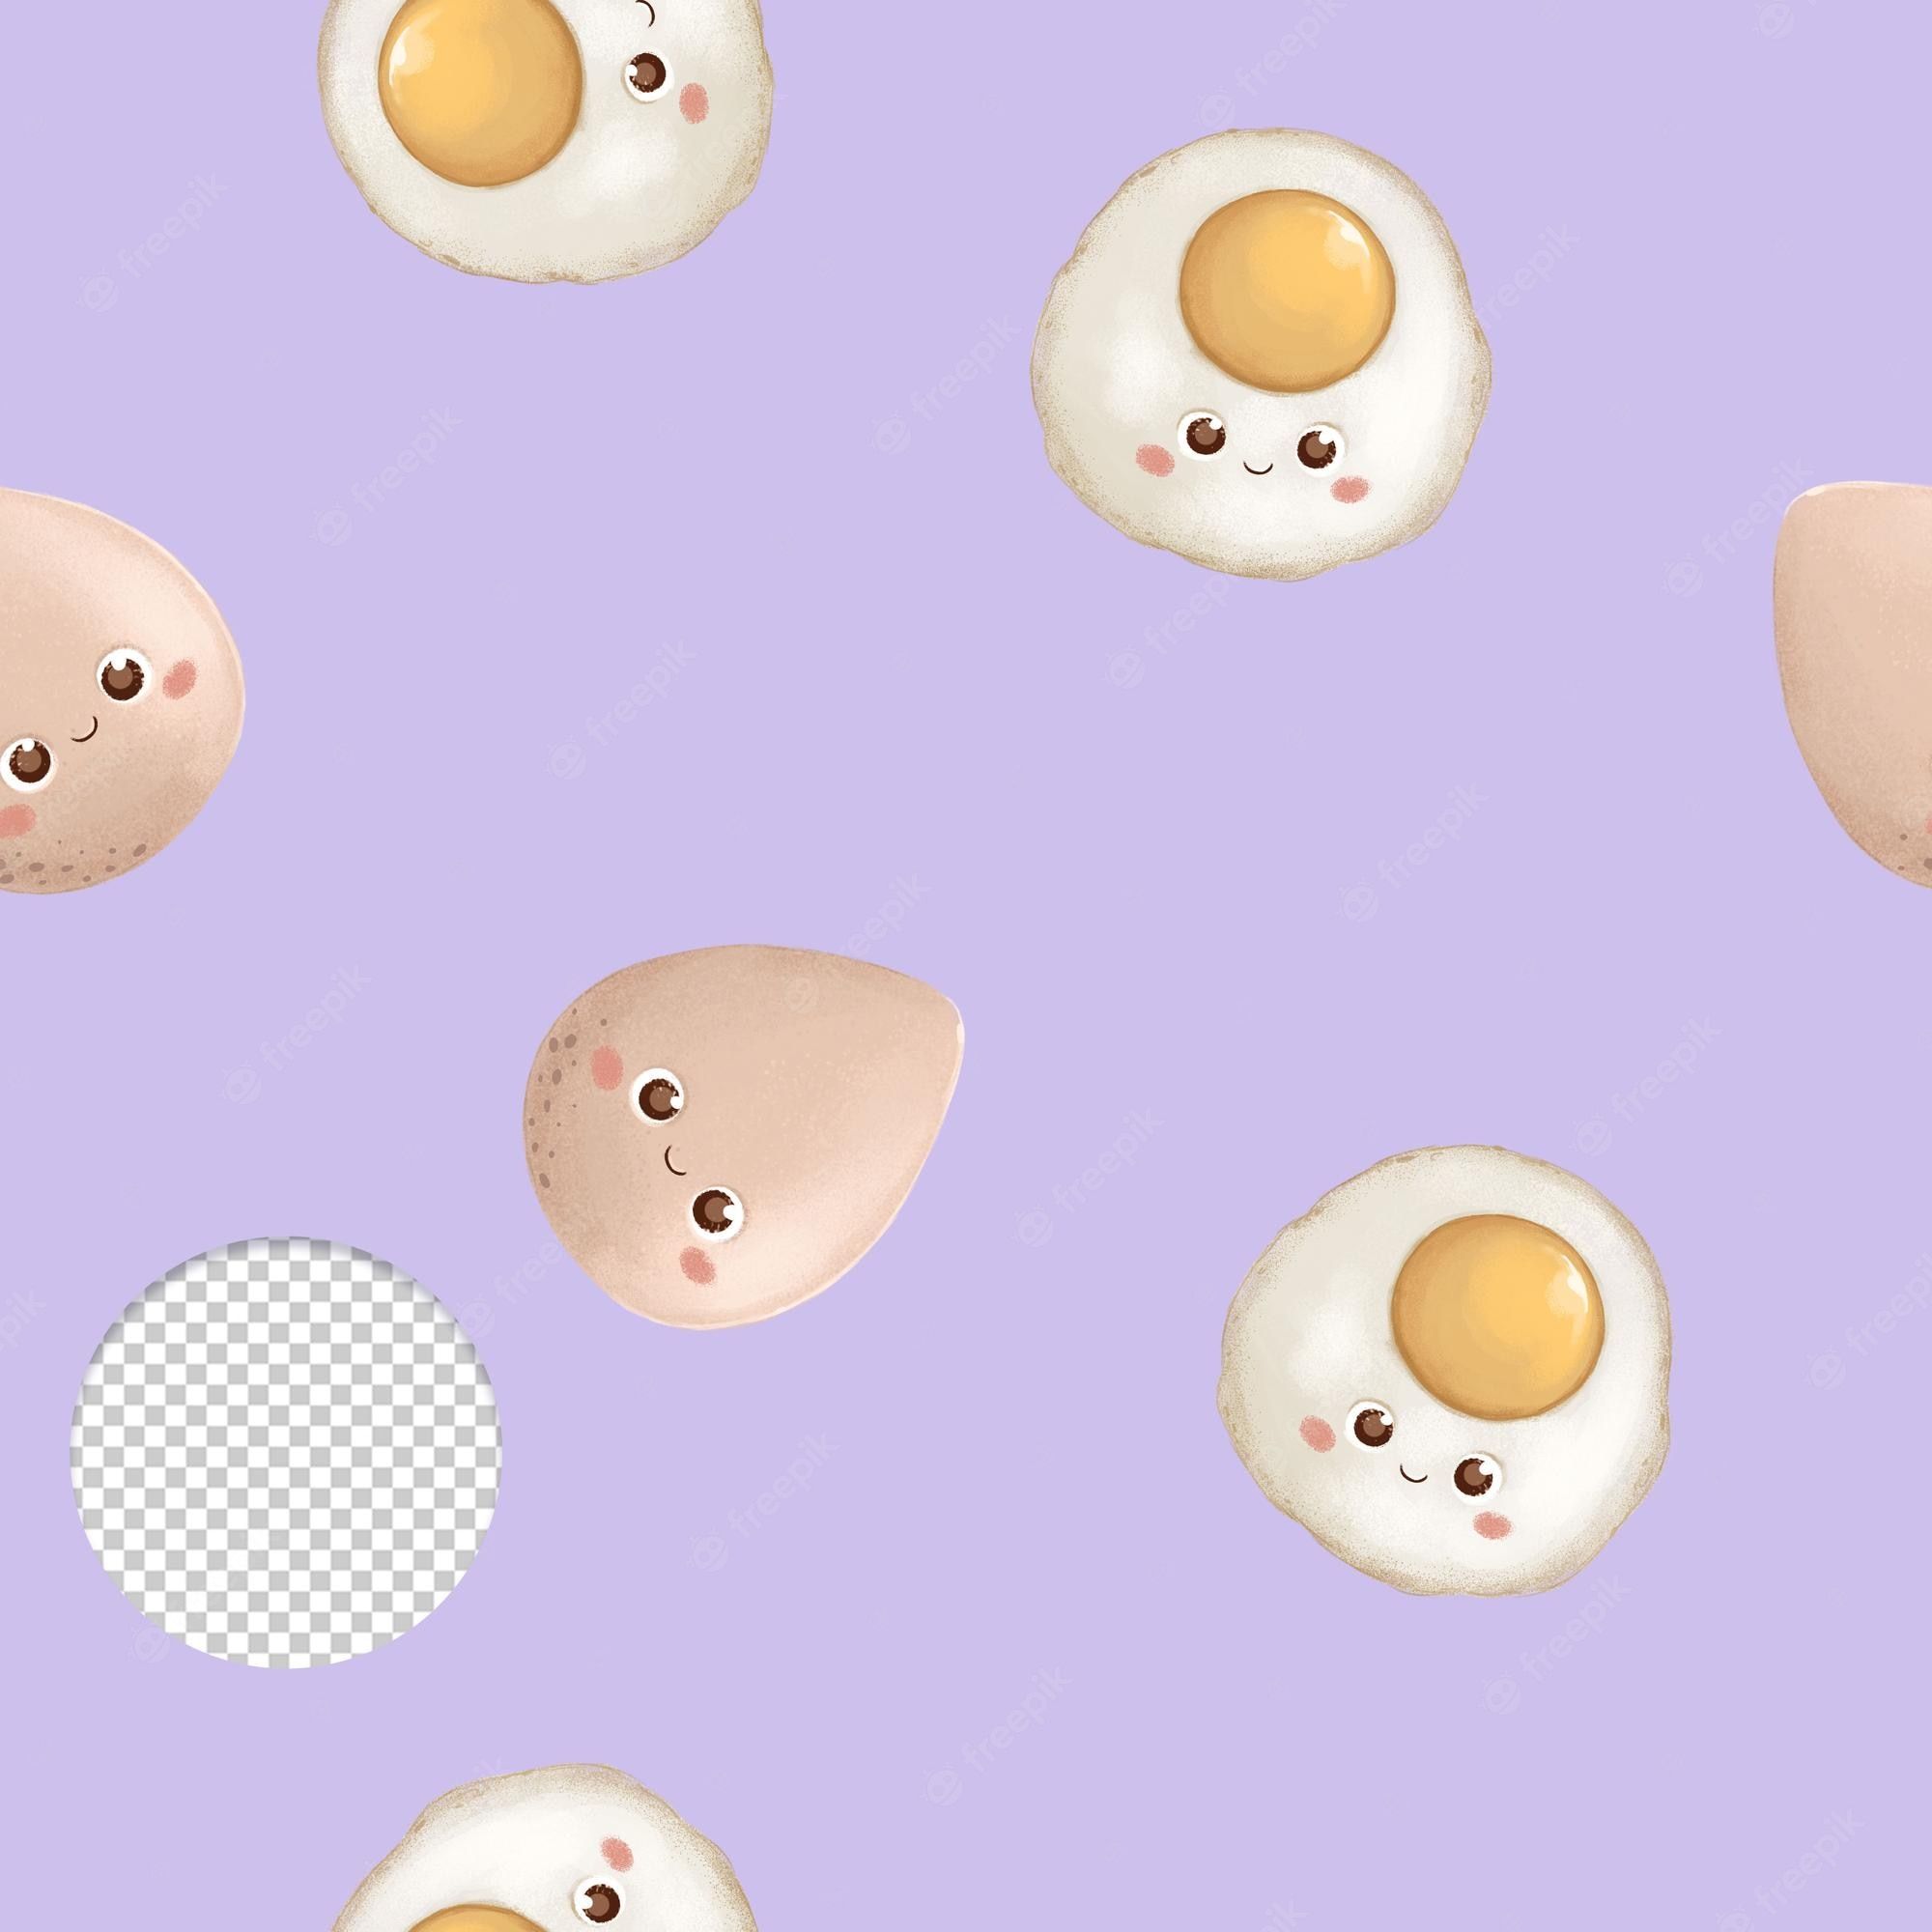 Premium PSD. Cute egg and fried egg seamless pattern on lilac background